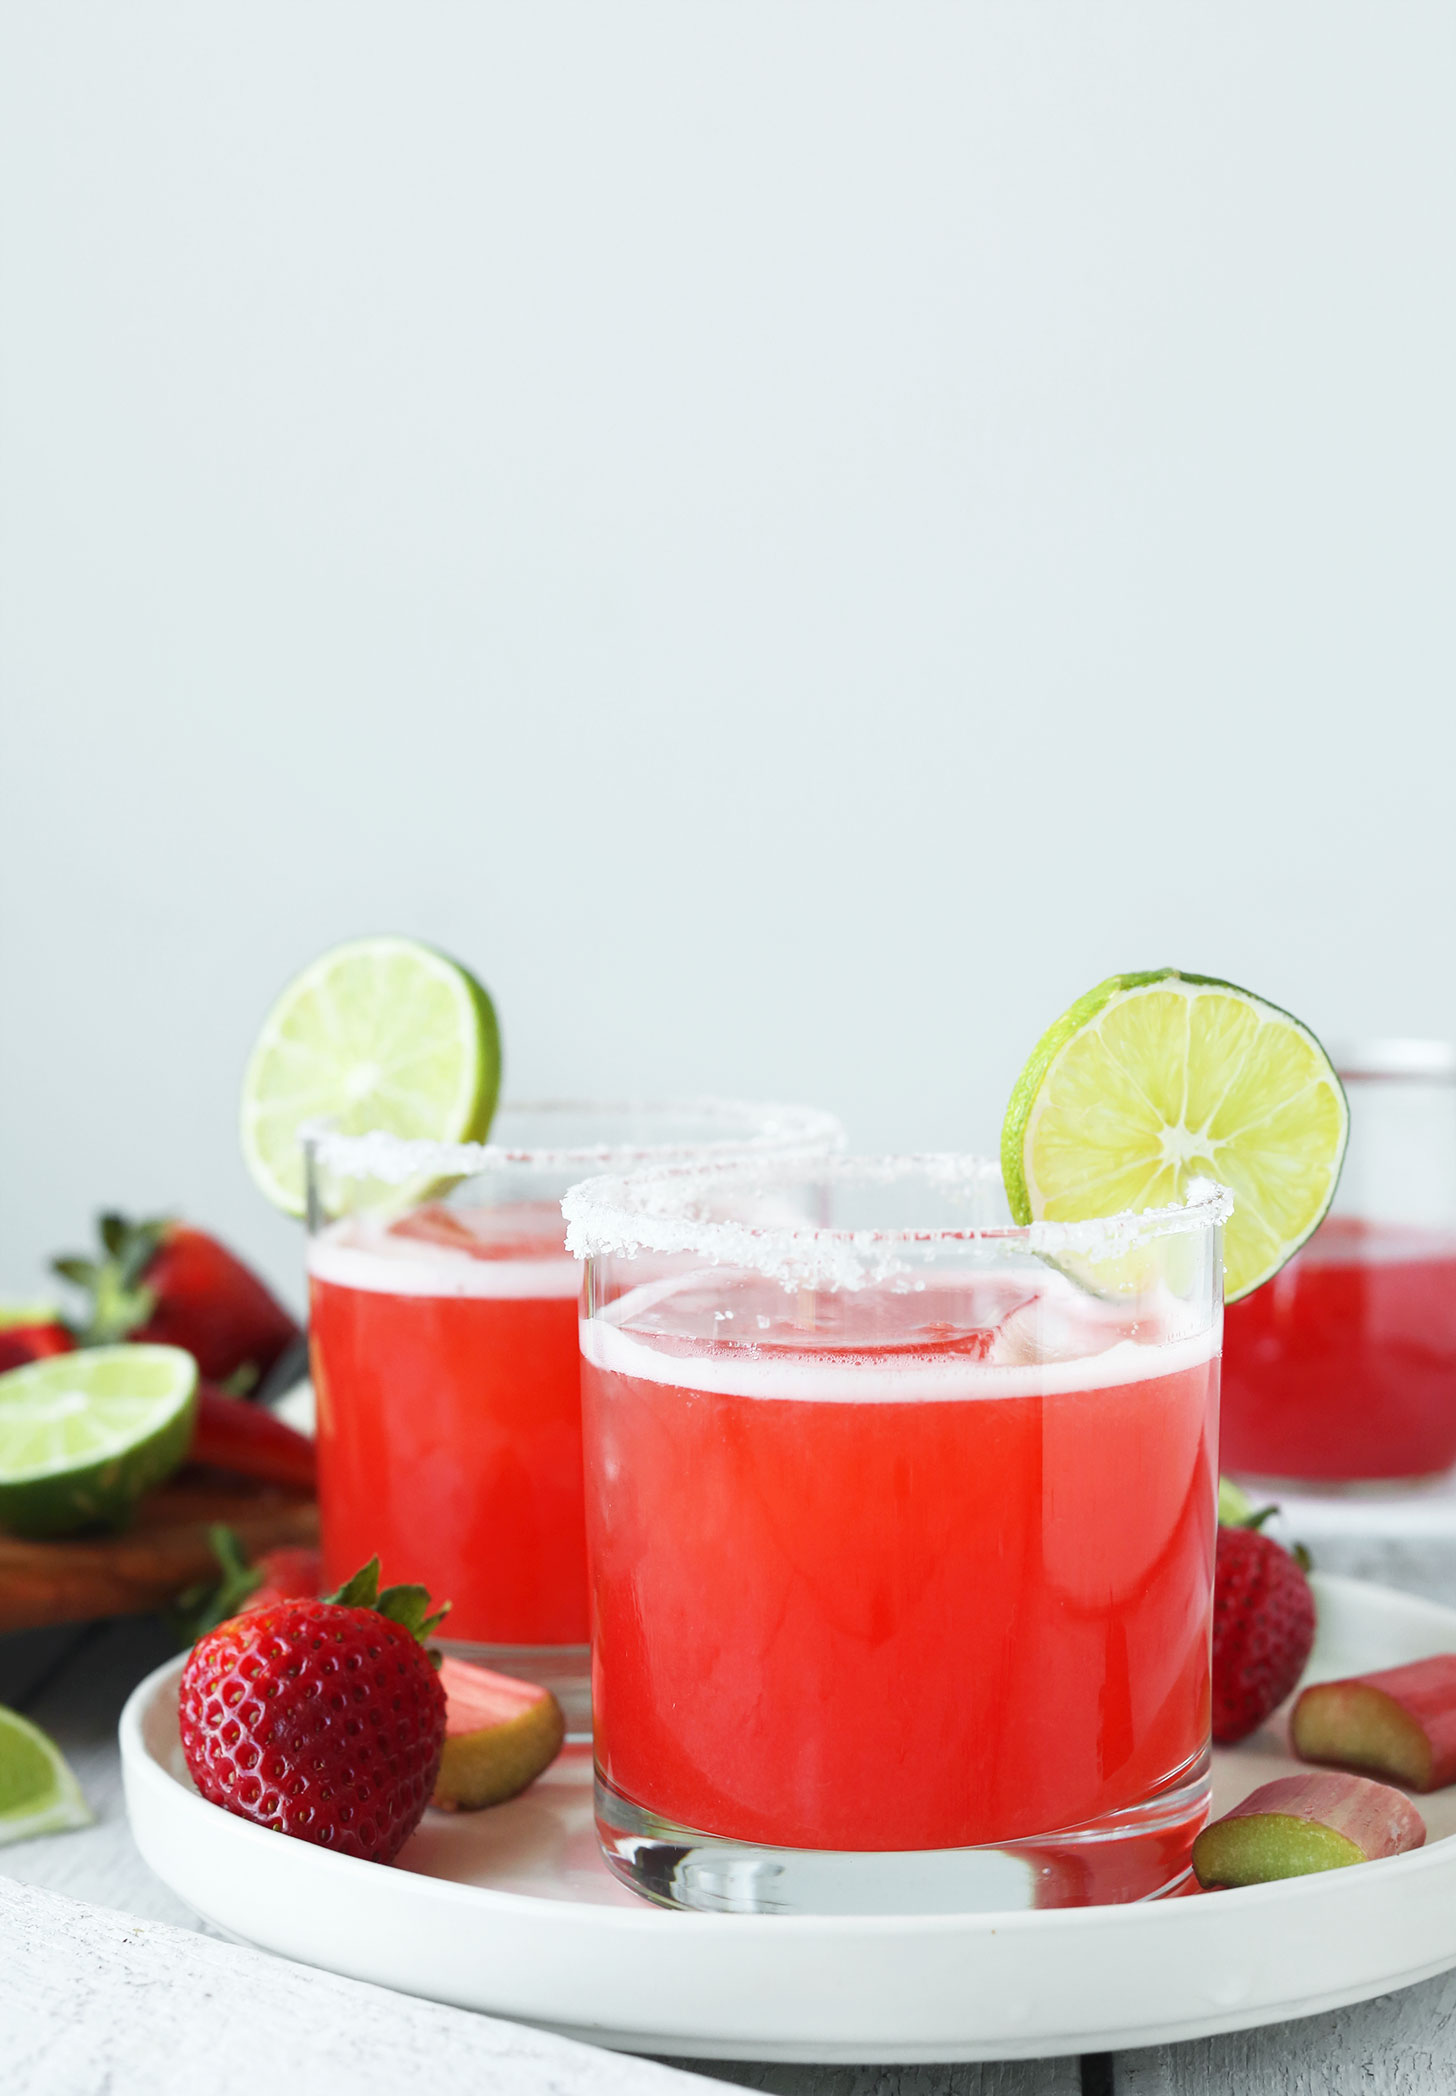 Glasses of our easy Strawberry Rhubarb Margaritas recipe on a try